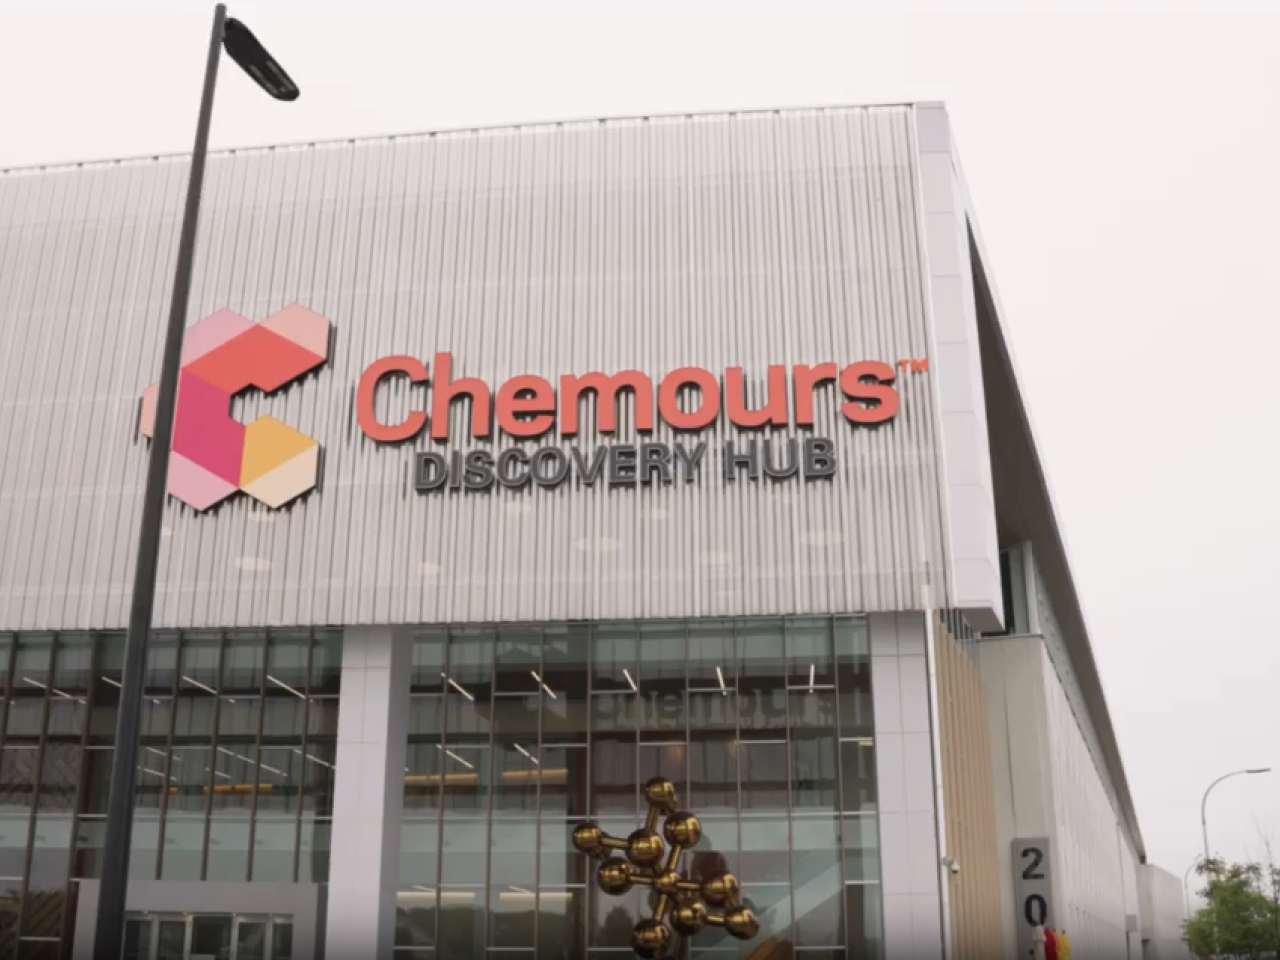 Chemours Discovery Hub building